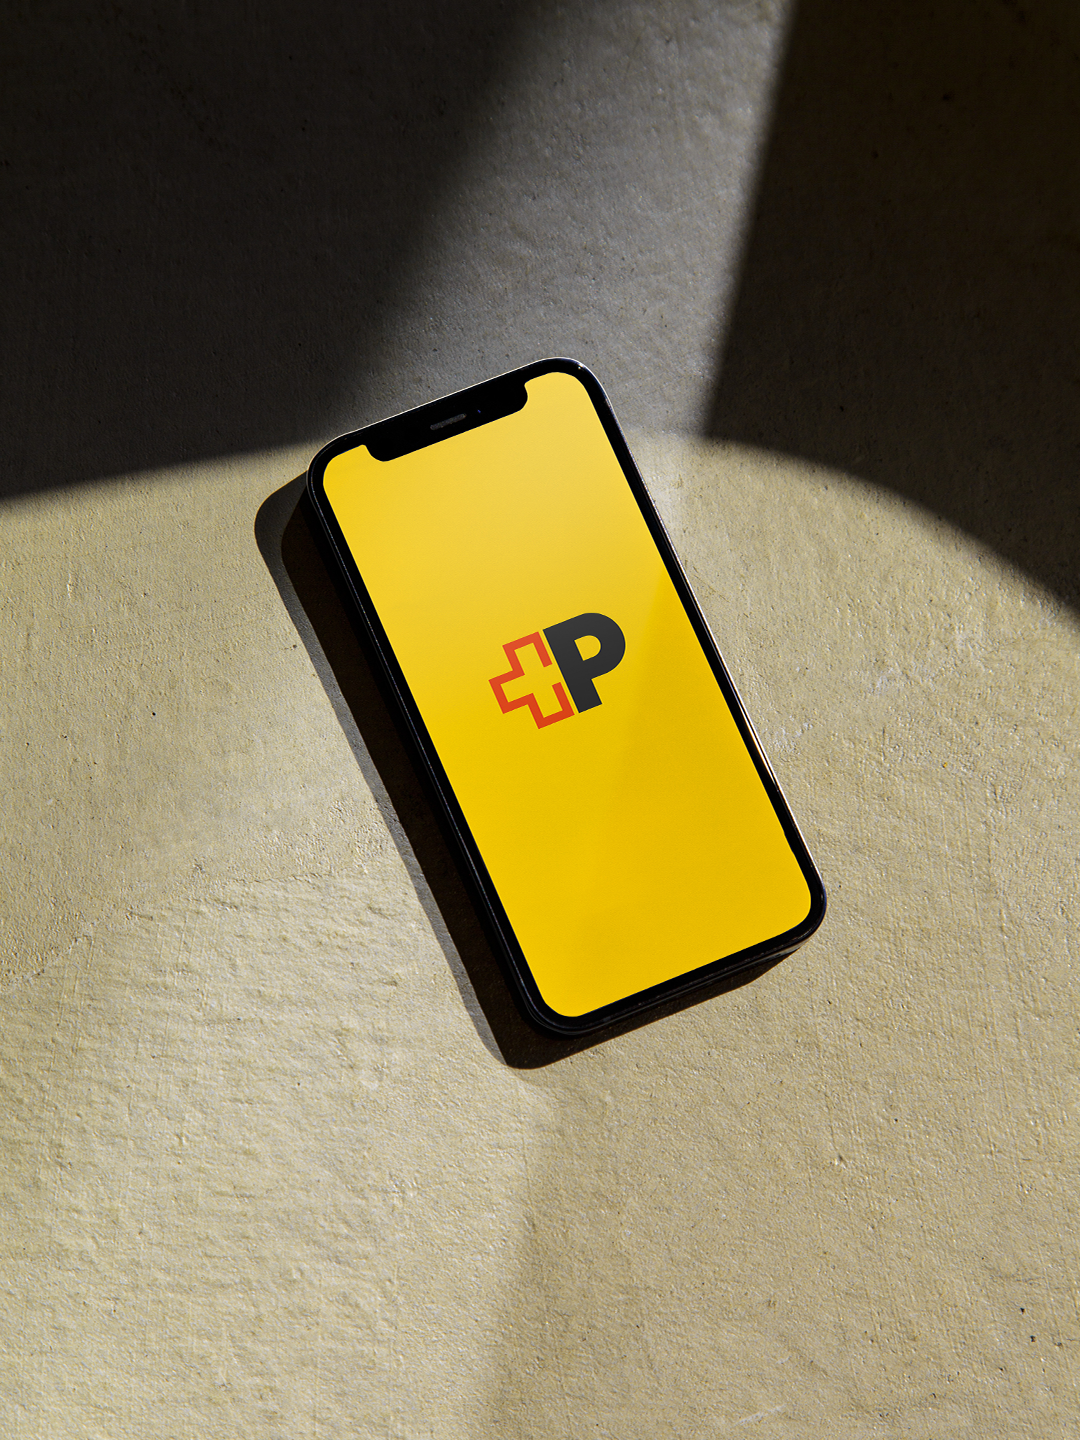 Image from the brand strategy campaign by Jung von Matt BRAND IDENTITY for the Swiss Post. The image shows a smartphone with the new brand logo consisting of a stylized red Swiss cross and a black "P" on a postal yellow background.